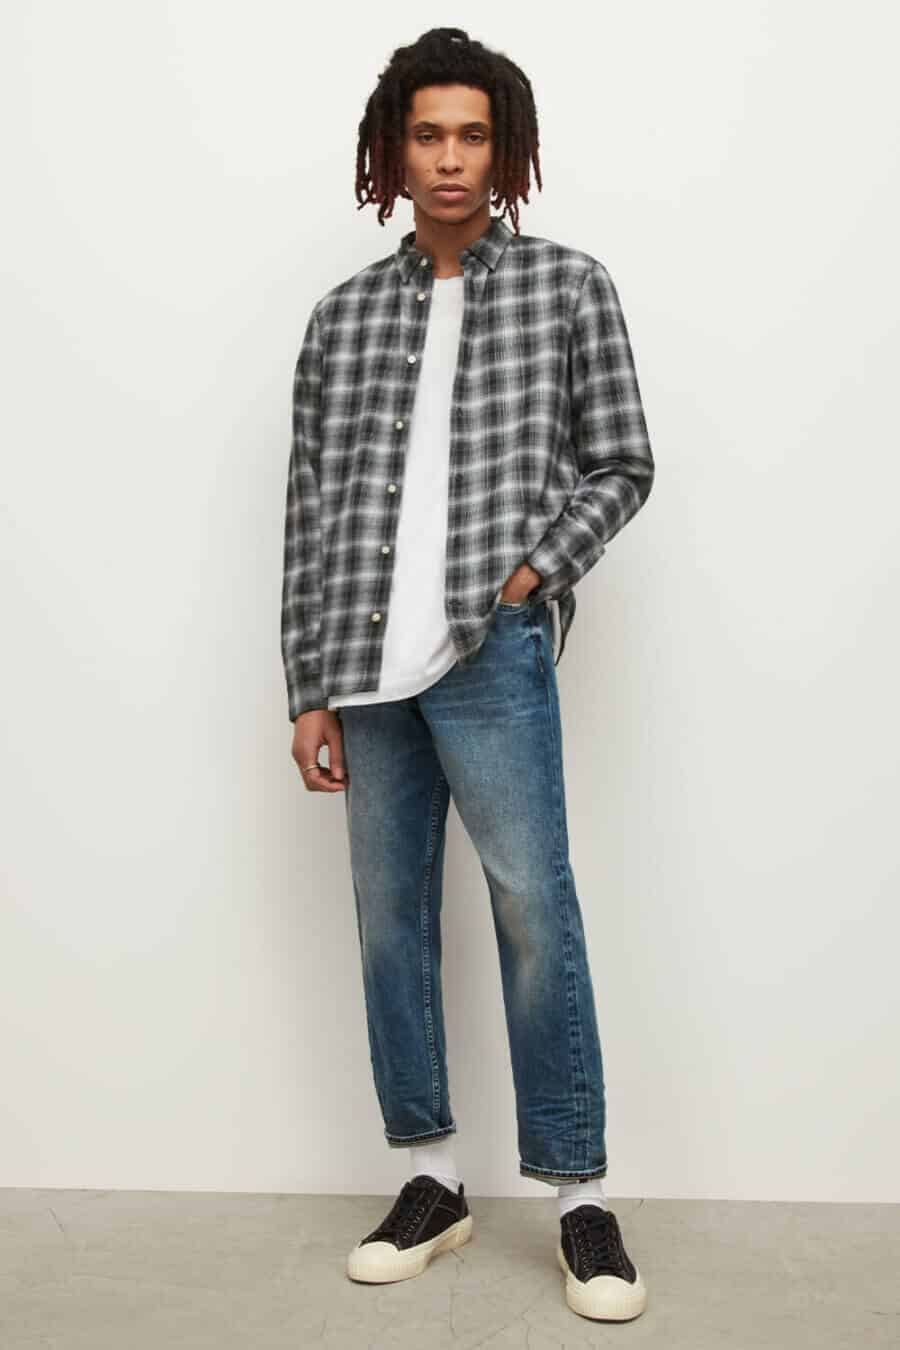 Men's skater flannel shirt outfit with canvas sneakers